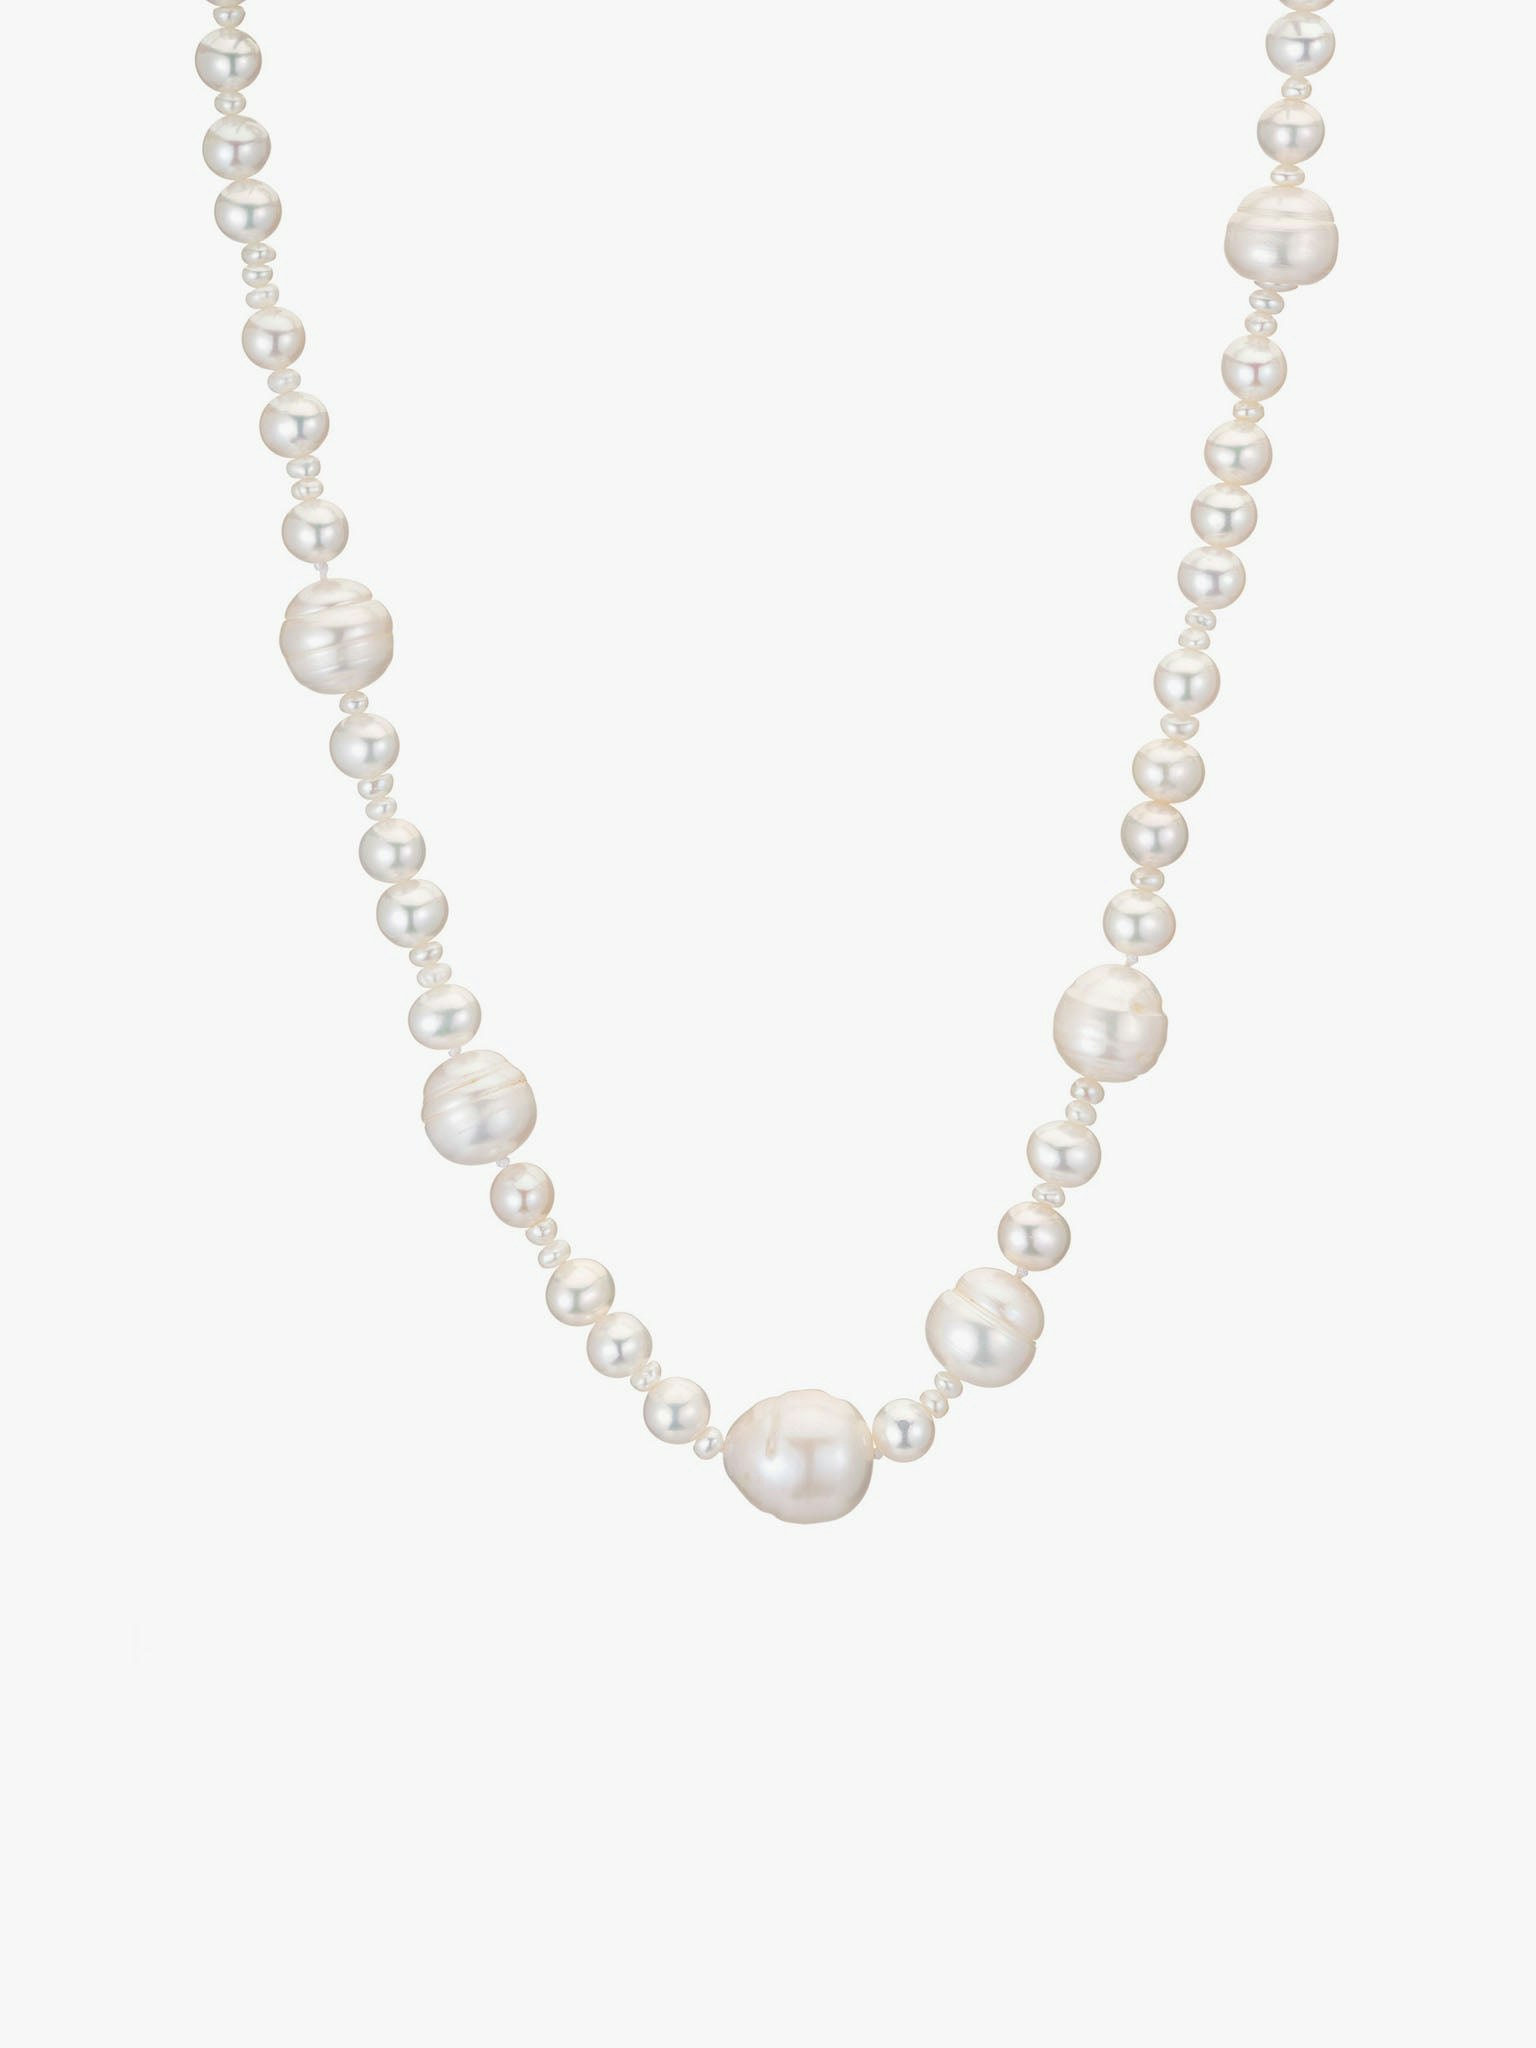 Pearl sundry necklace photo 3